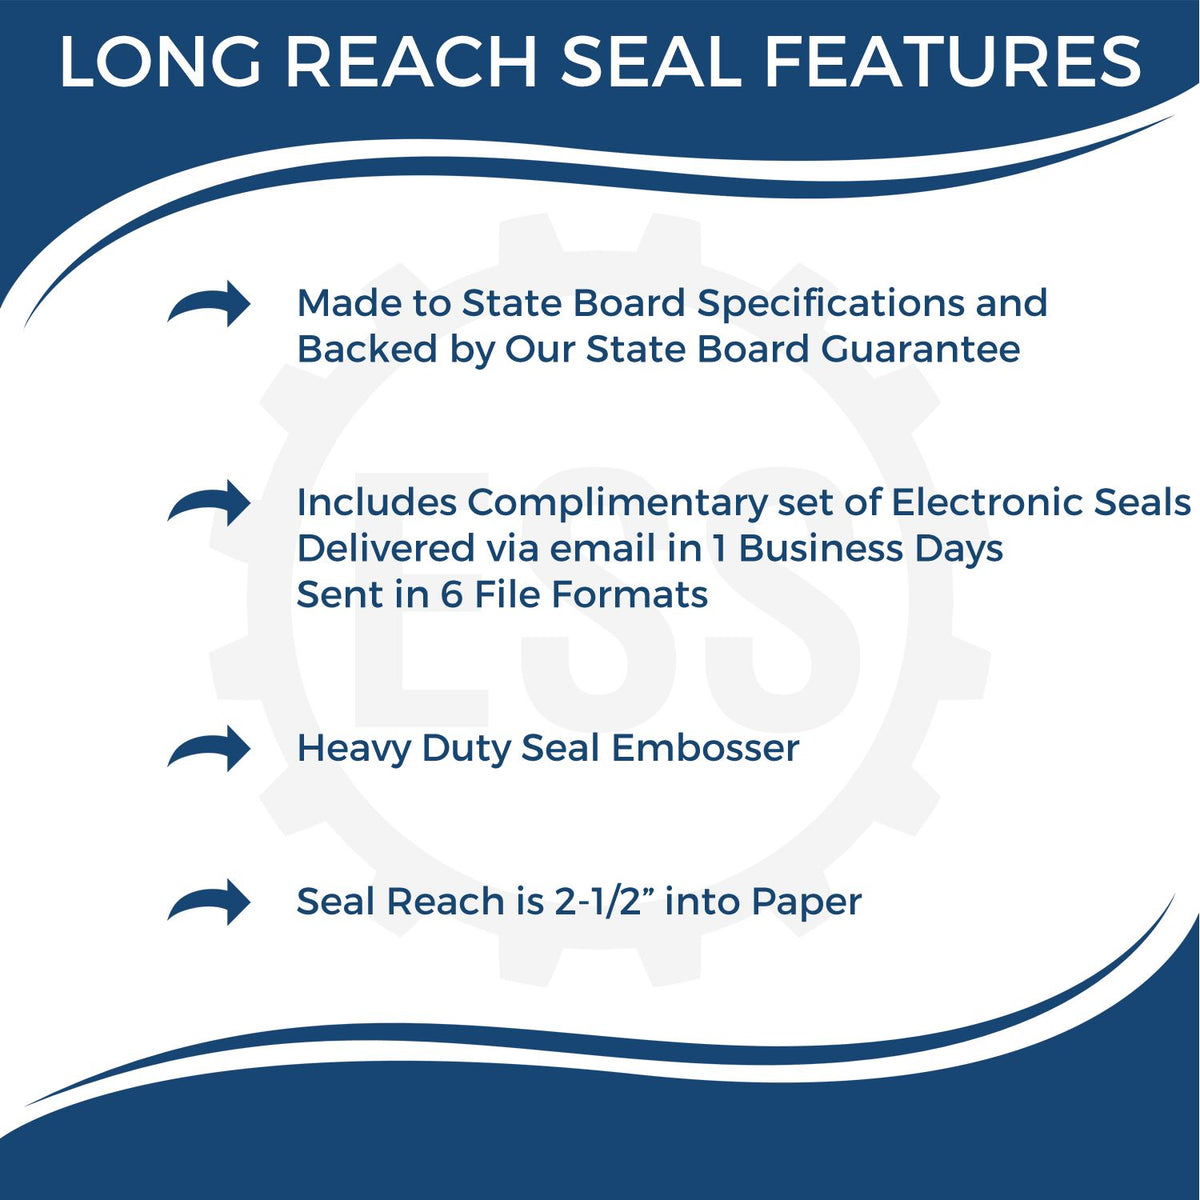 A picture of an infographic highlighting the selling points for the Long Reach Nevada PE Seal